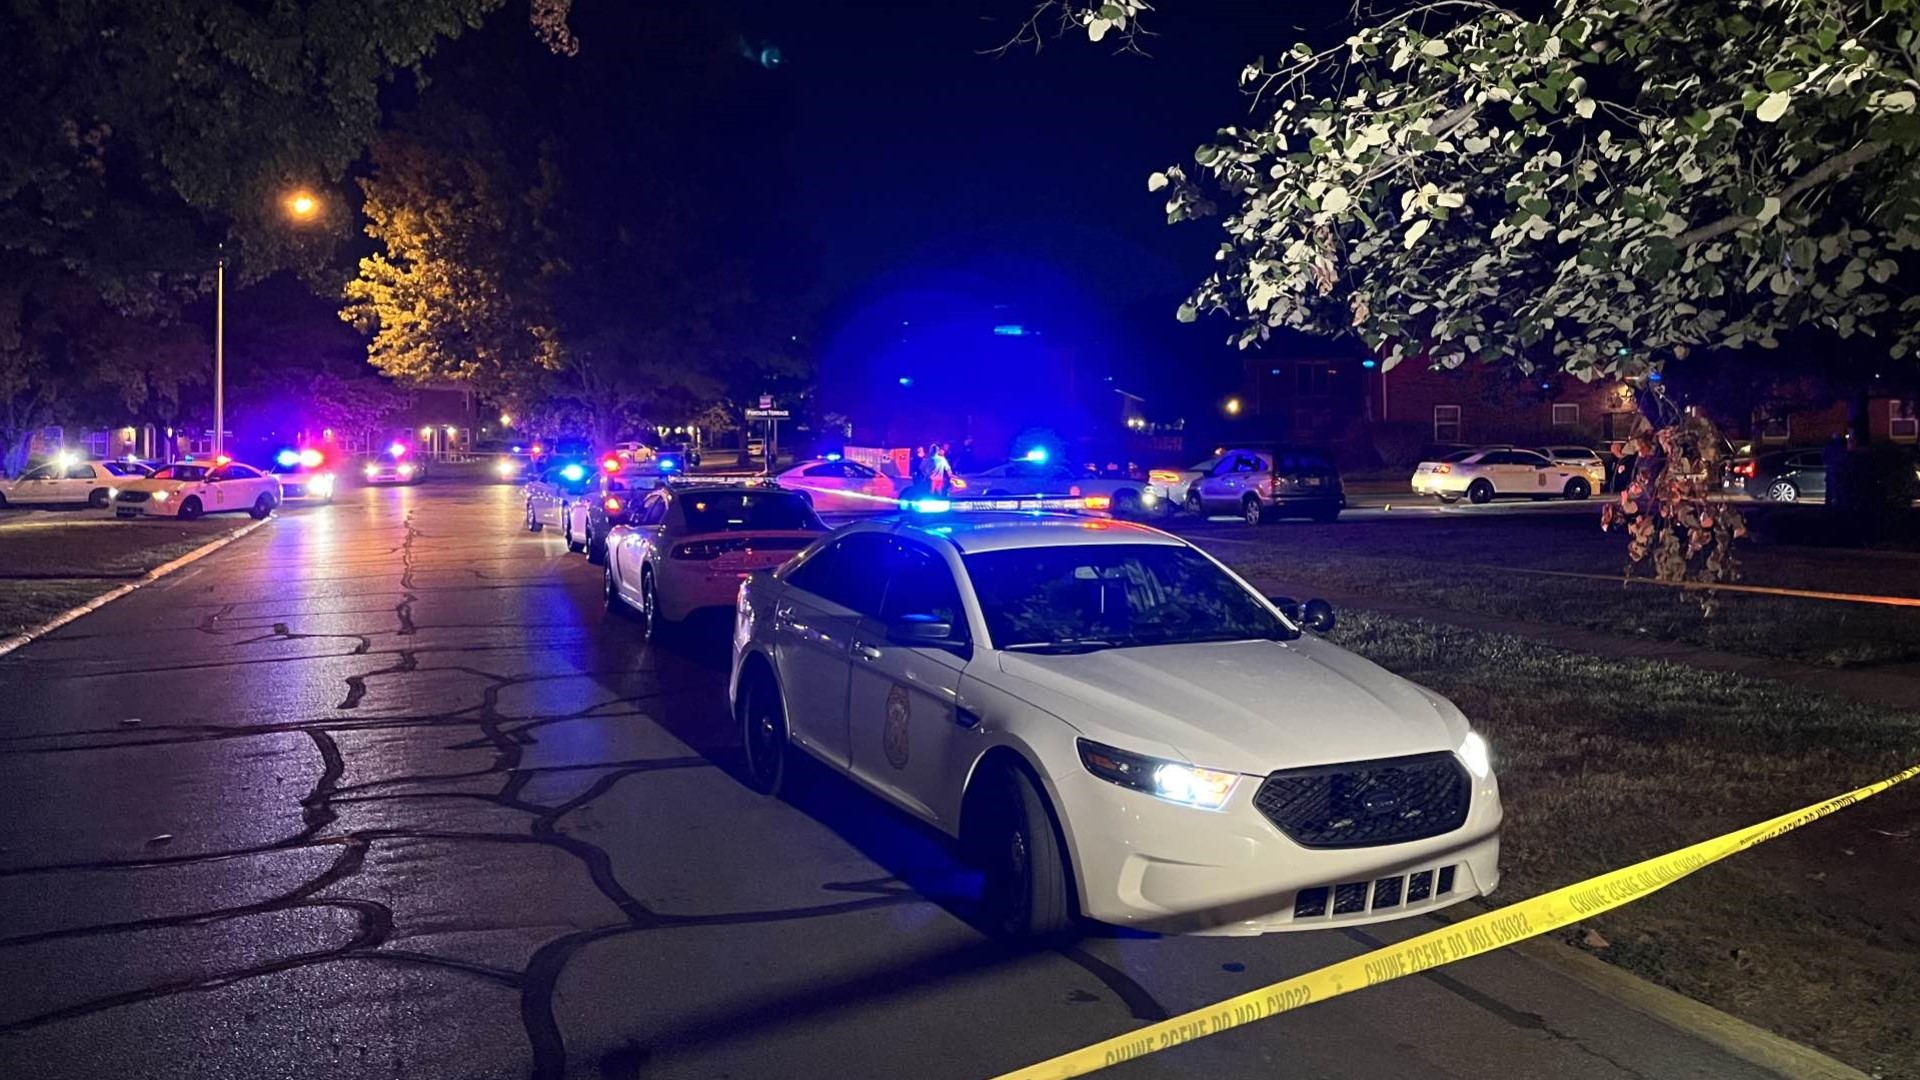 The shooting happened shortly after 3 a.m. Sept. 19 in the 1800 block of Portage Terrace, near Madison Avenue and East Stop 10 Road.